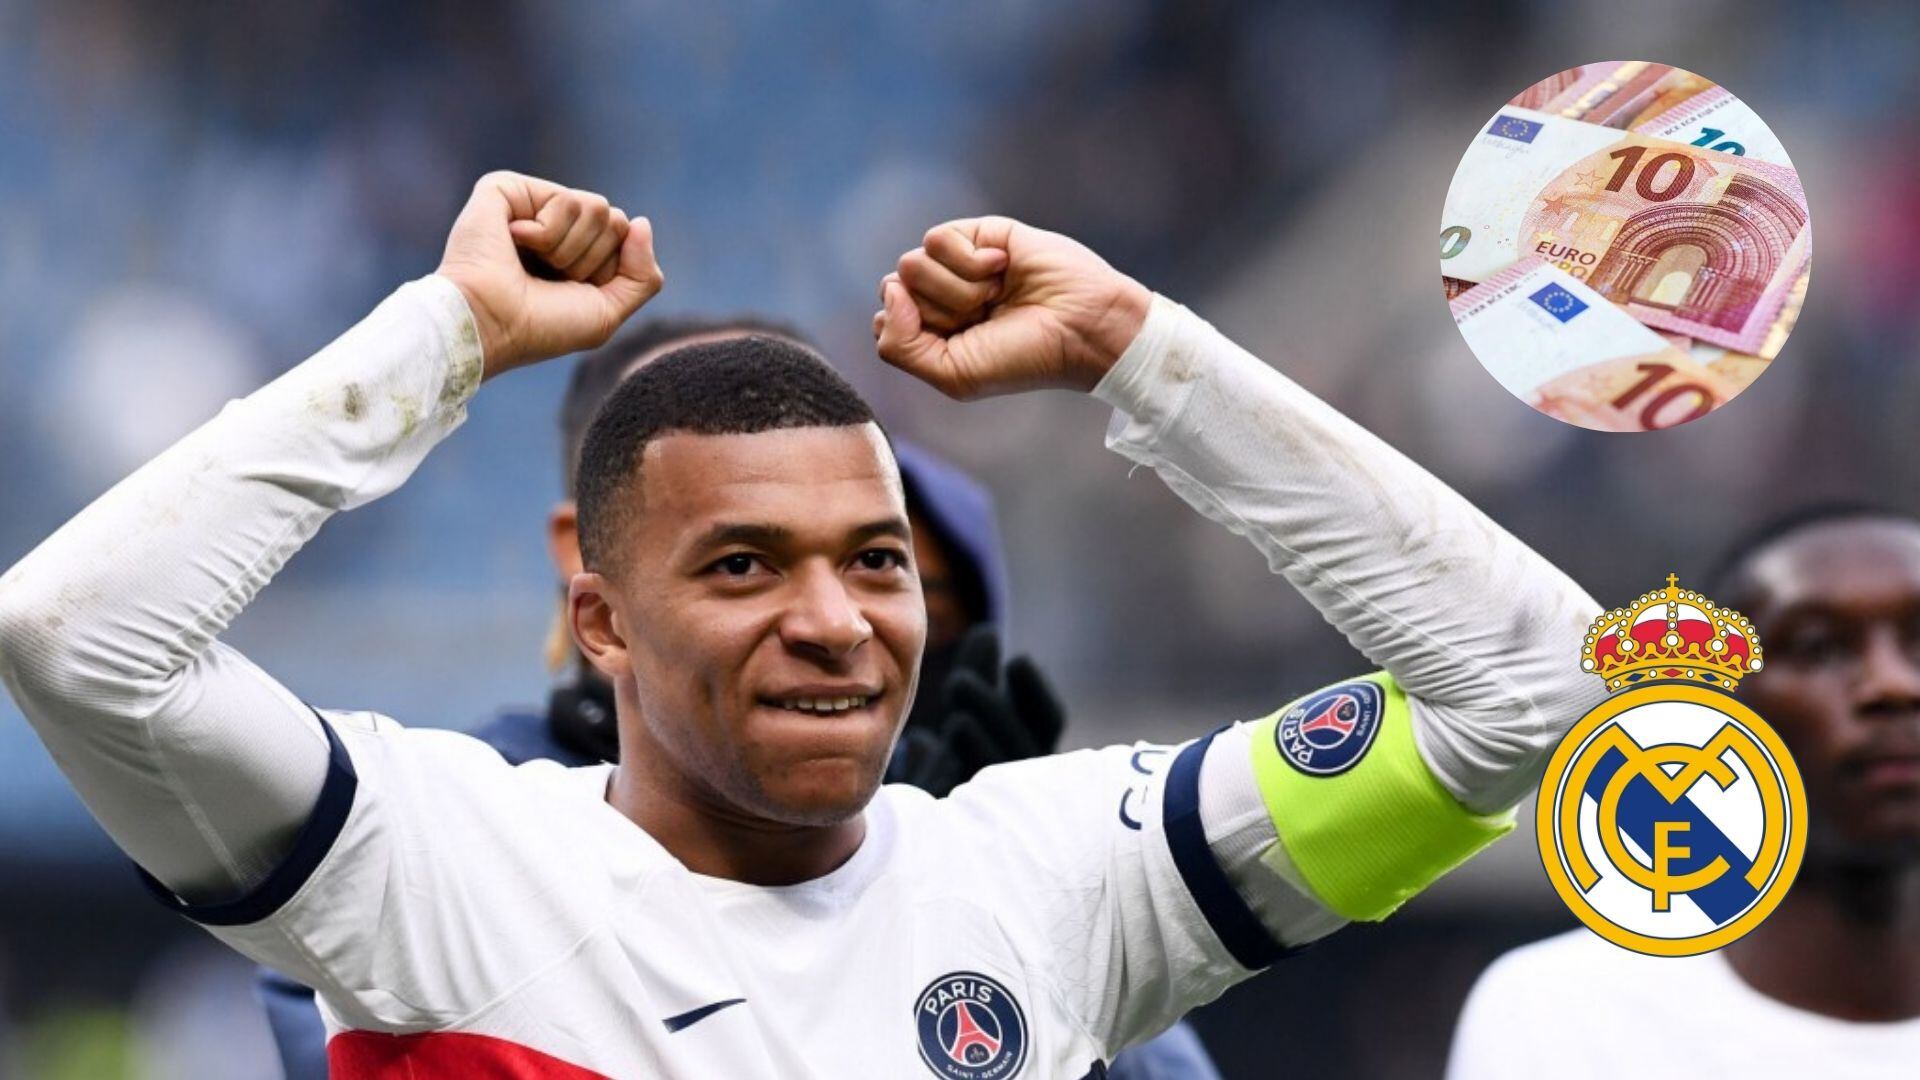 Mbappe to sign for Real Madrid and PSG's 175 million replacement